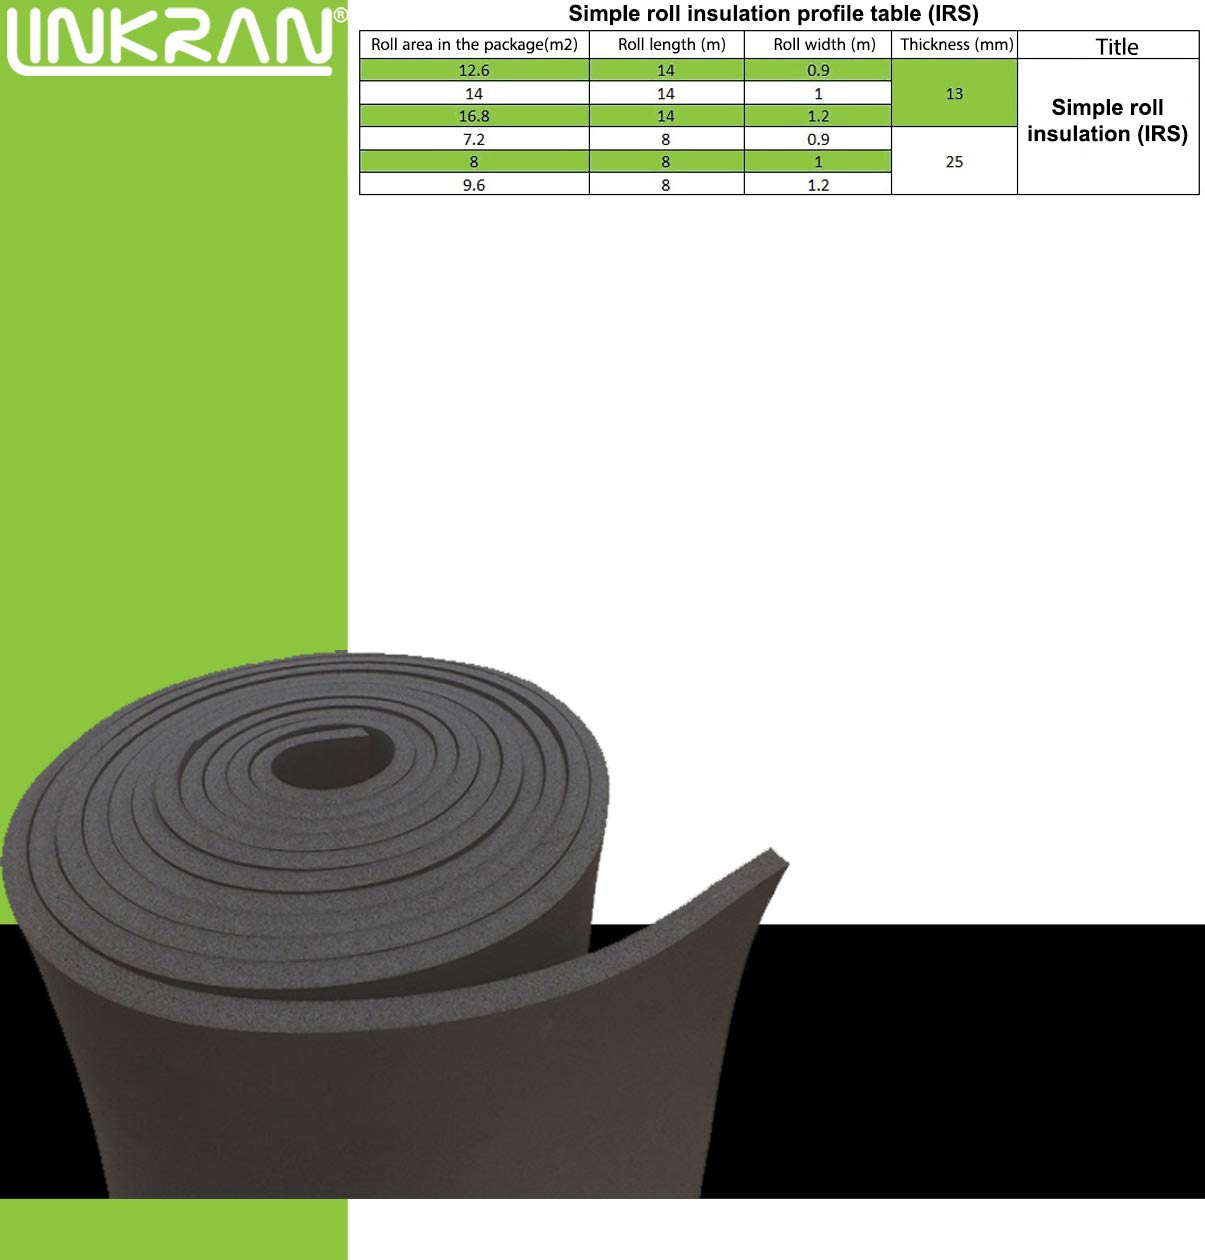 Simple rolled sound insulation (IRS)-Linkran Industrial Group